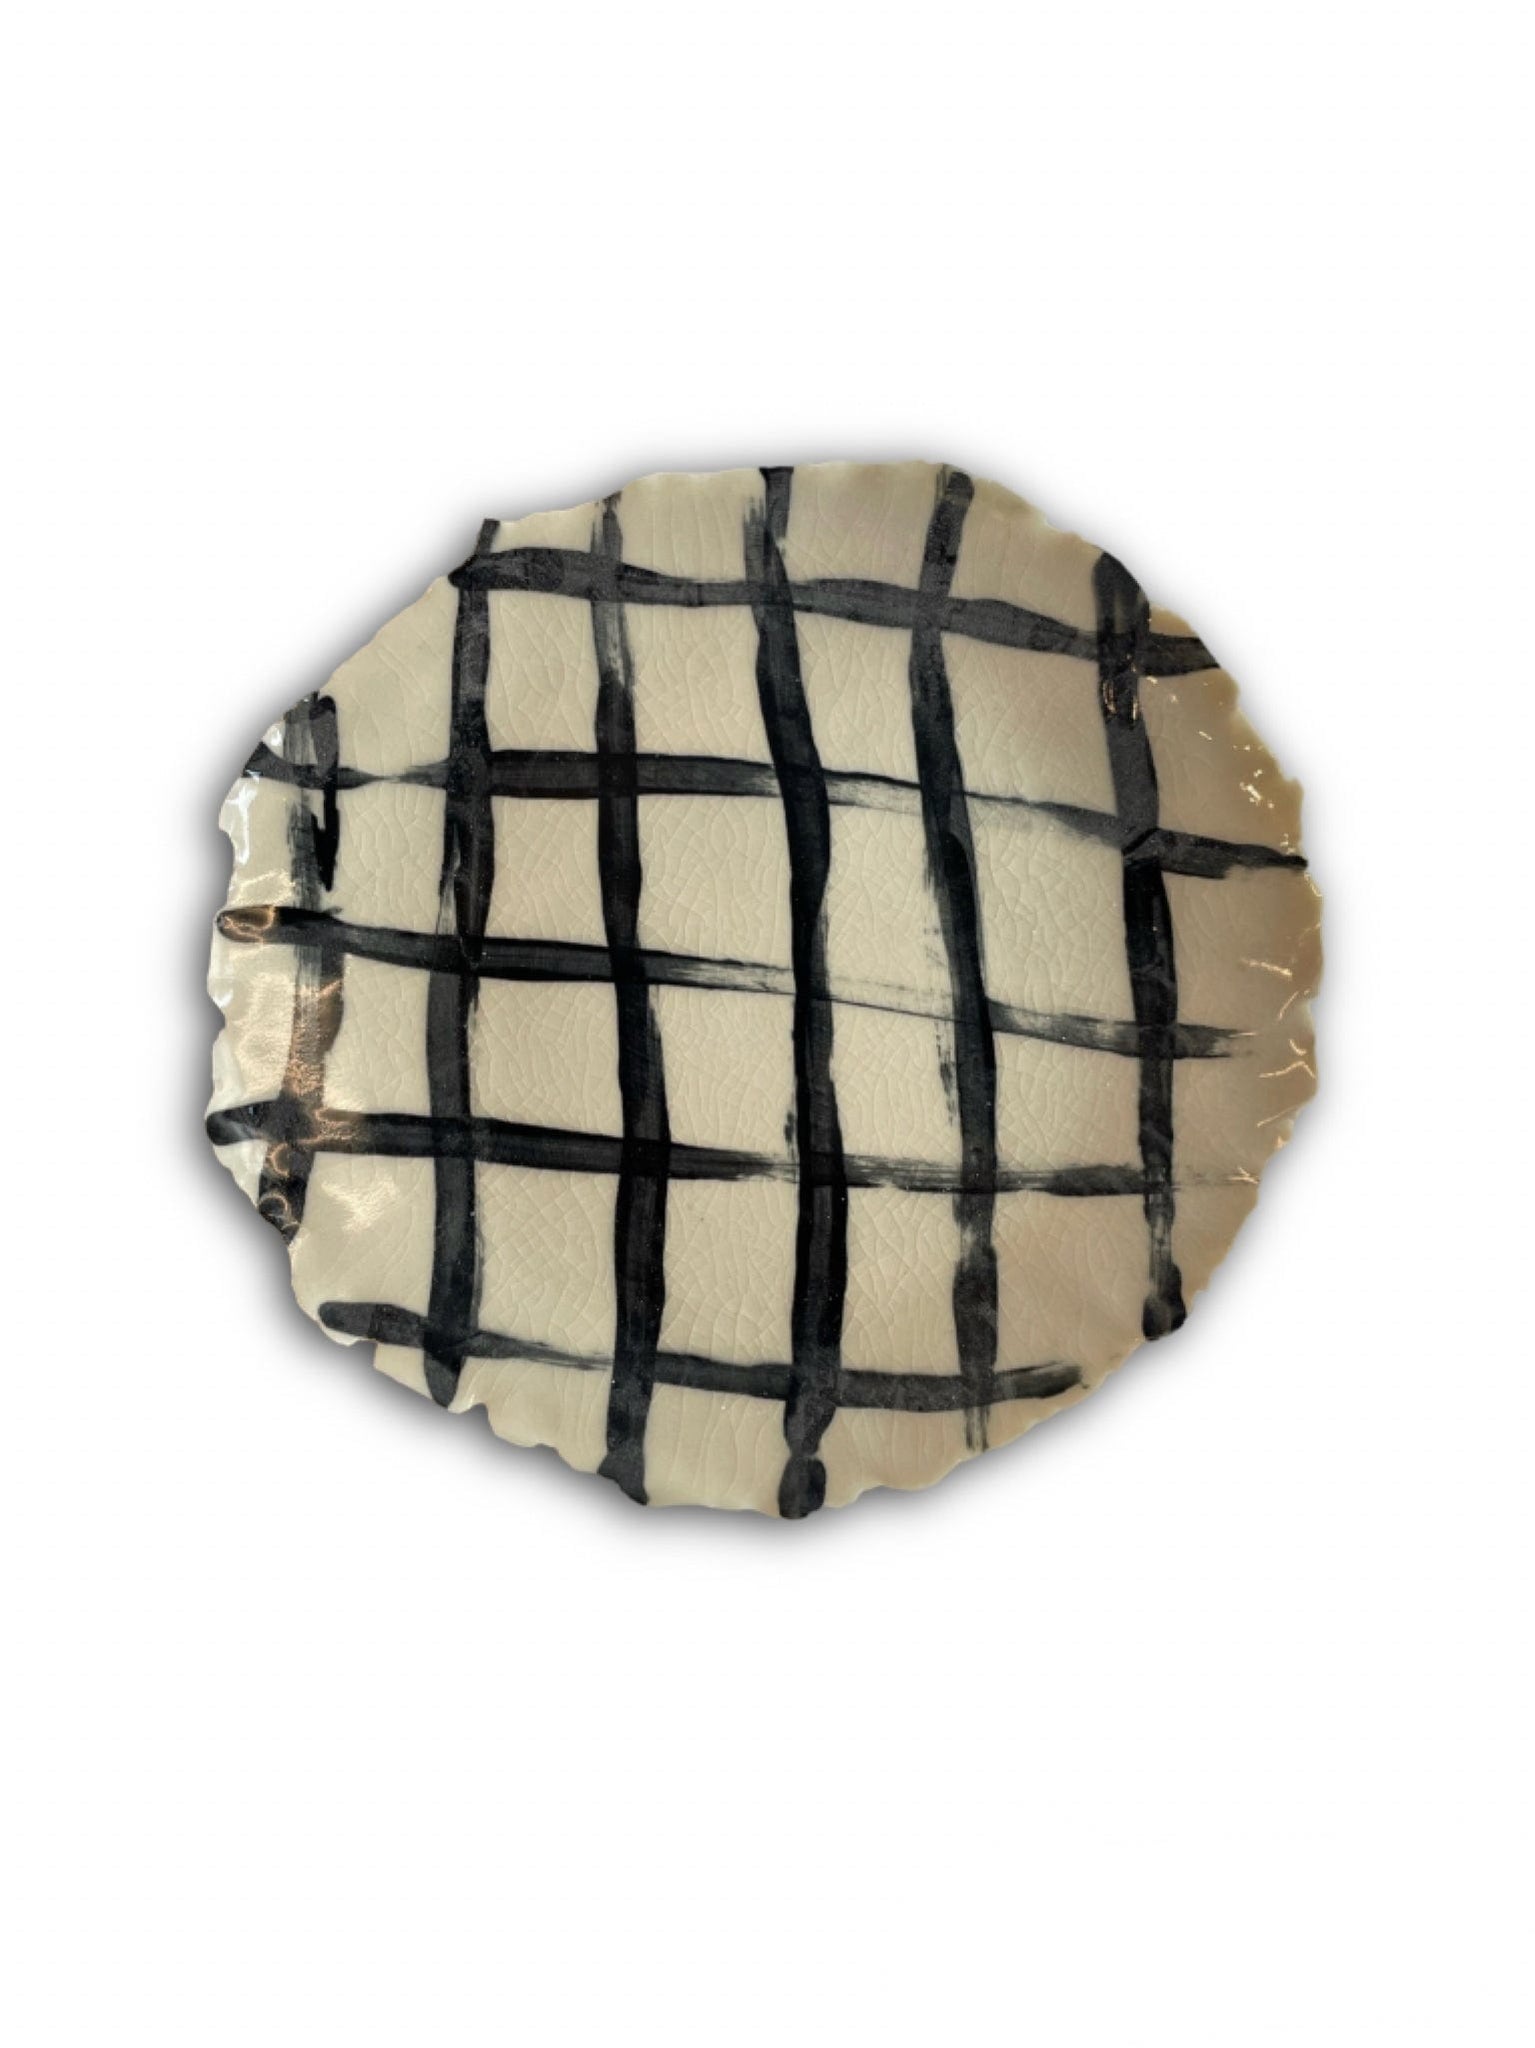 La Bomba Floristry Nathalee Paolinelli - Torn Edge Plate in Cream with Black Grid La Bomba Floristry Vancouver Canada